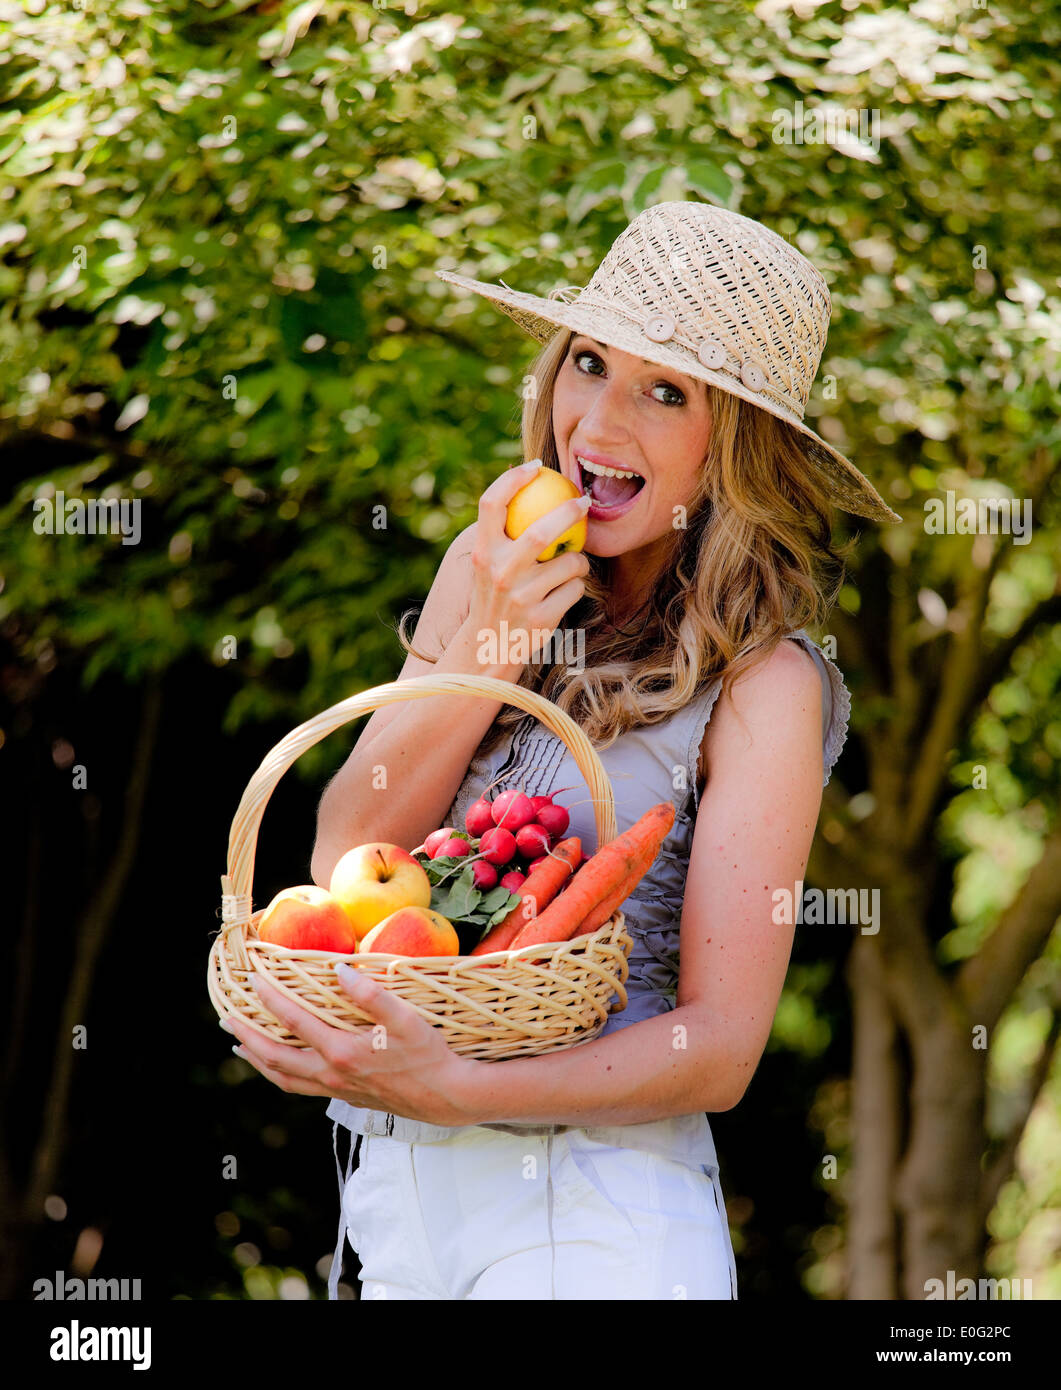 Woman with fruit and vegetables in the basket with woman, Frau mit Obst und Gemuese im Korb mit Frau Stock Photo